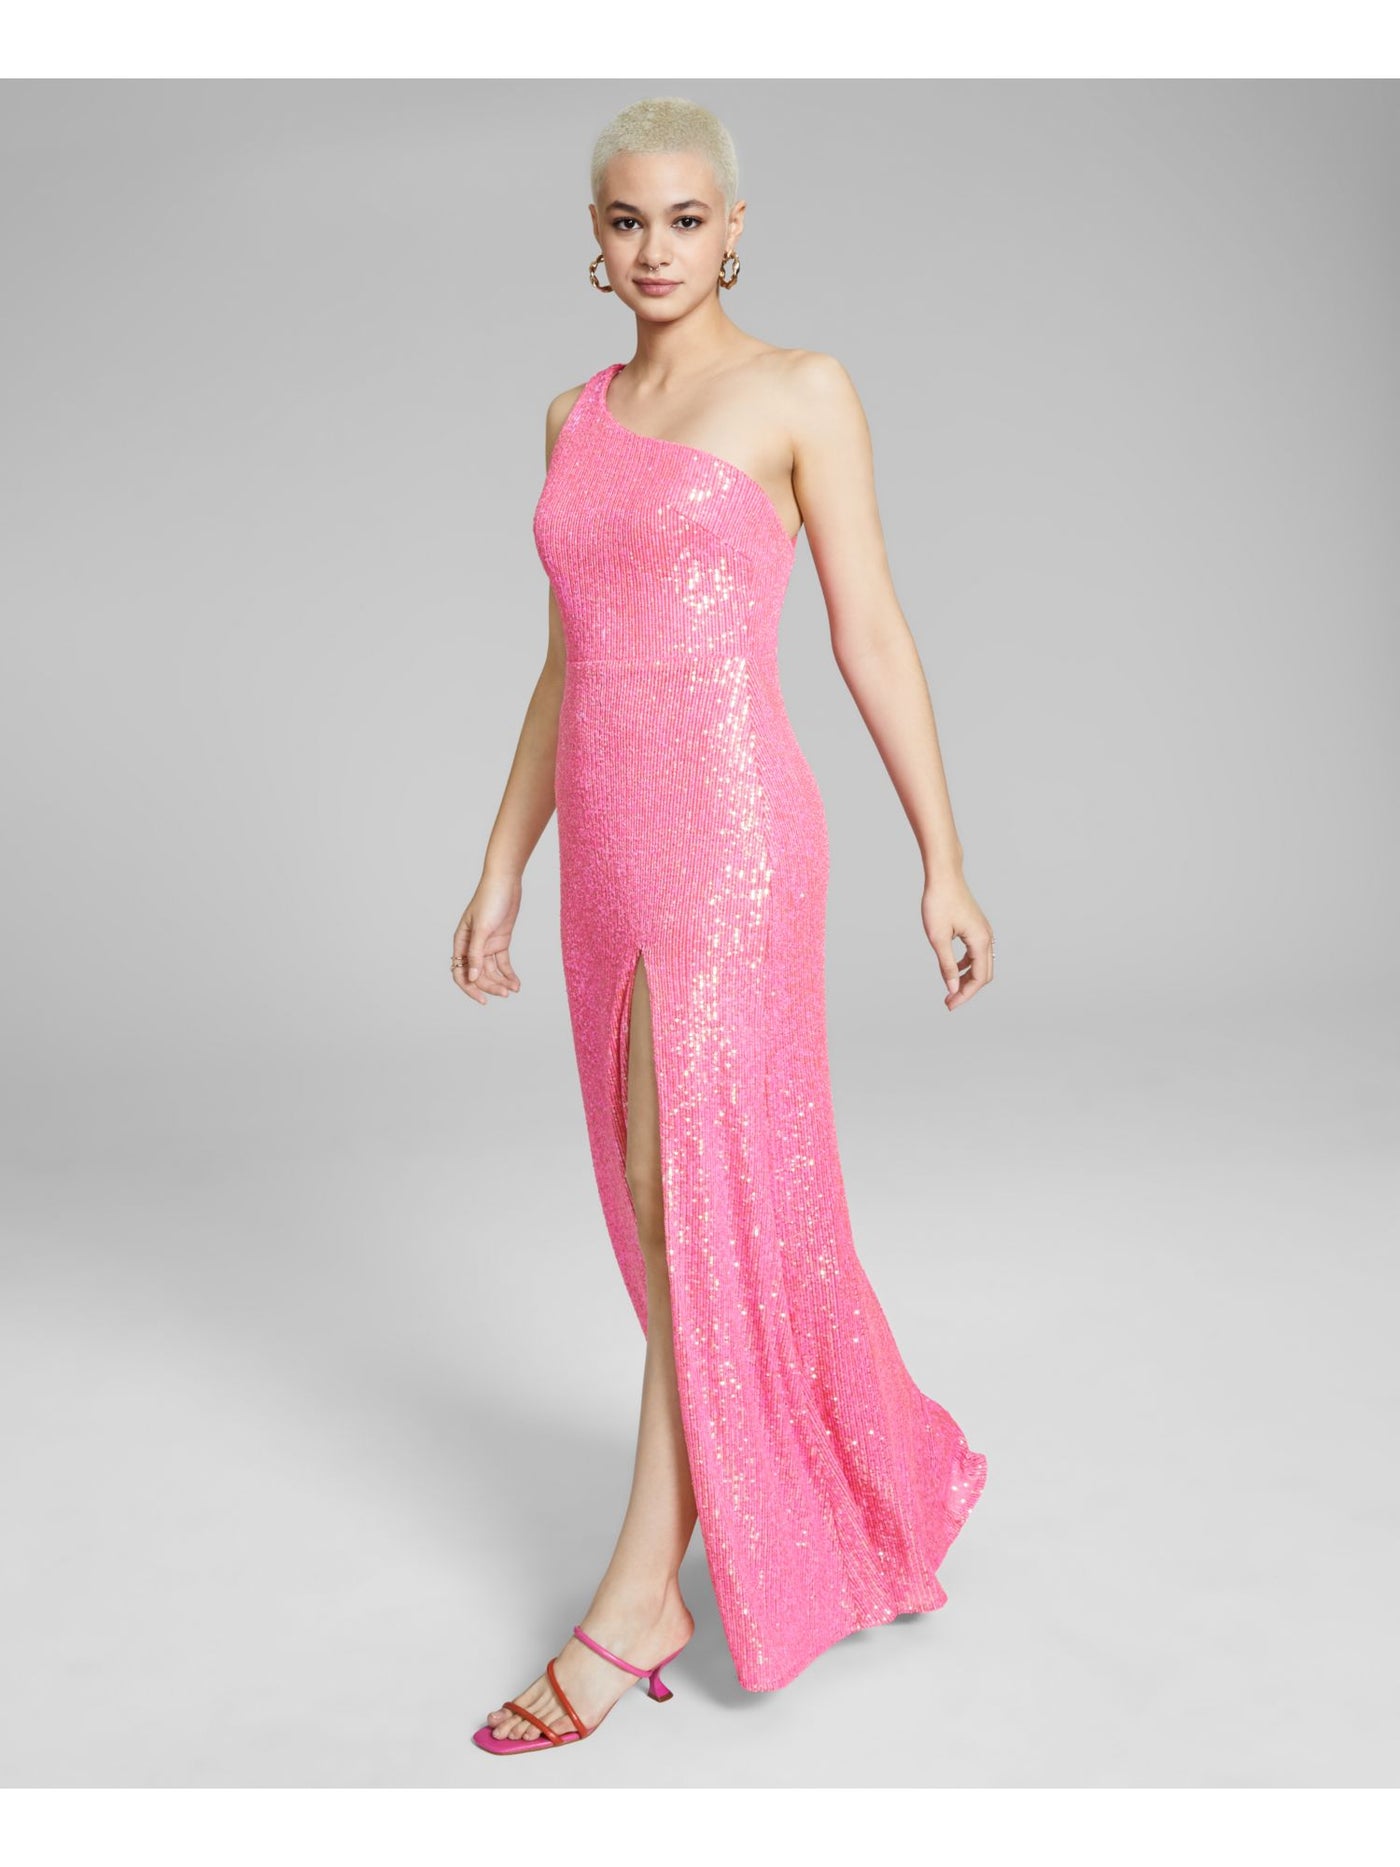 BLONDIE NITES Womens Pink Stretch Sequined Zippered Strappy Back Front Slit Lined Sleeveless Asymmetrical Neckline Full-Length Prom Gown Dress Juniors 13